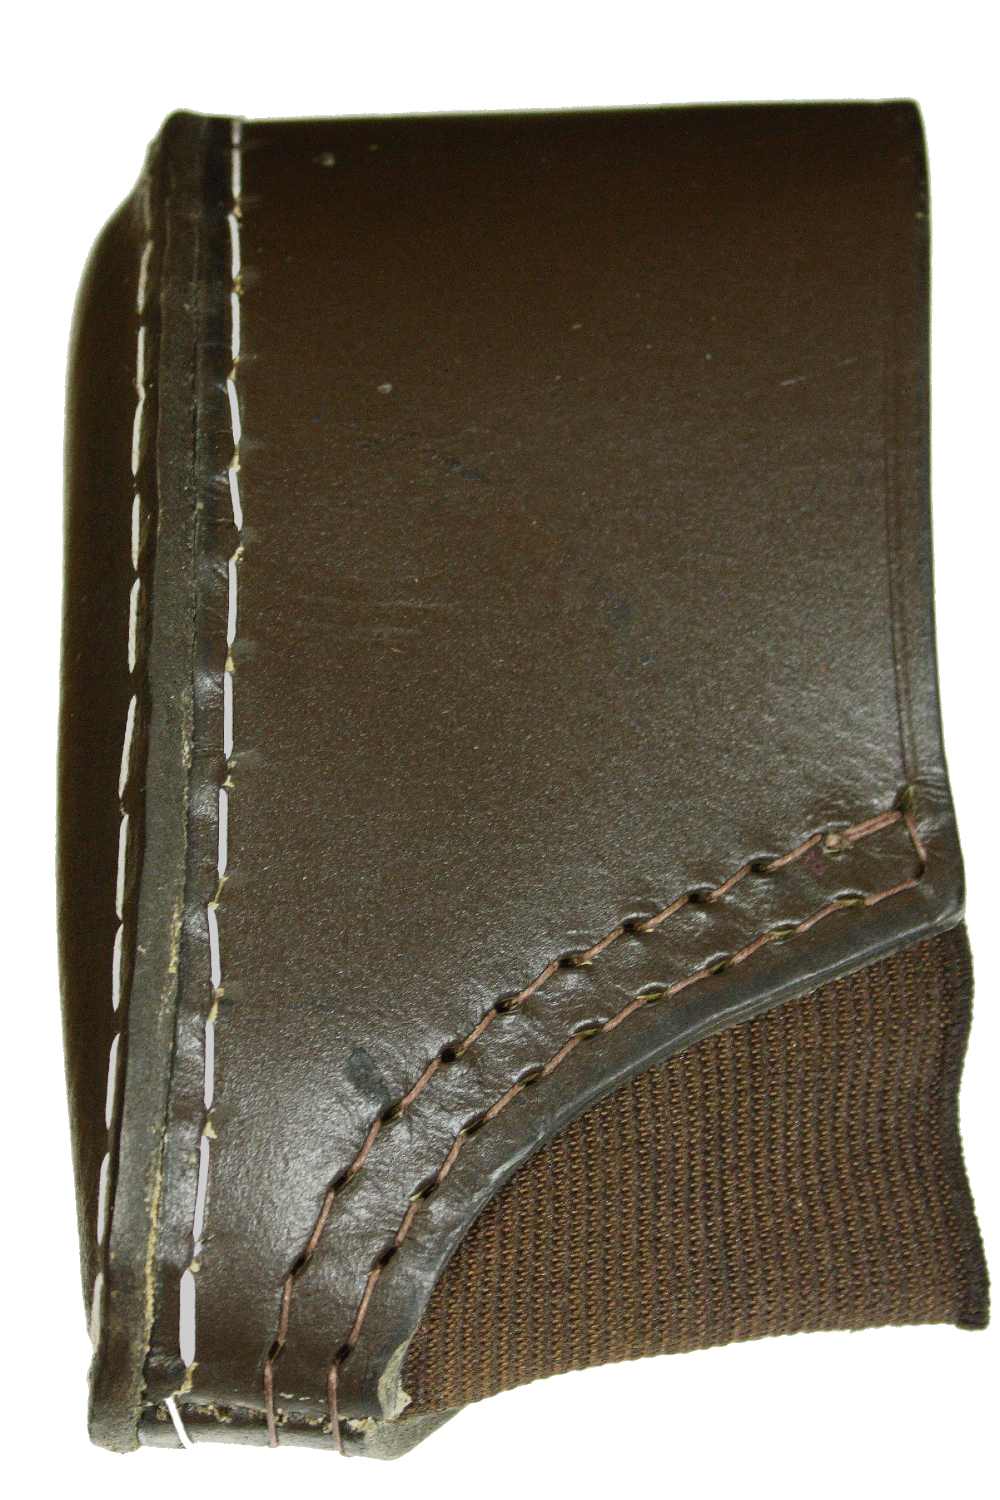 Bisley Leather Slip-on Recoil Pads